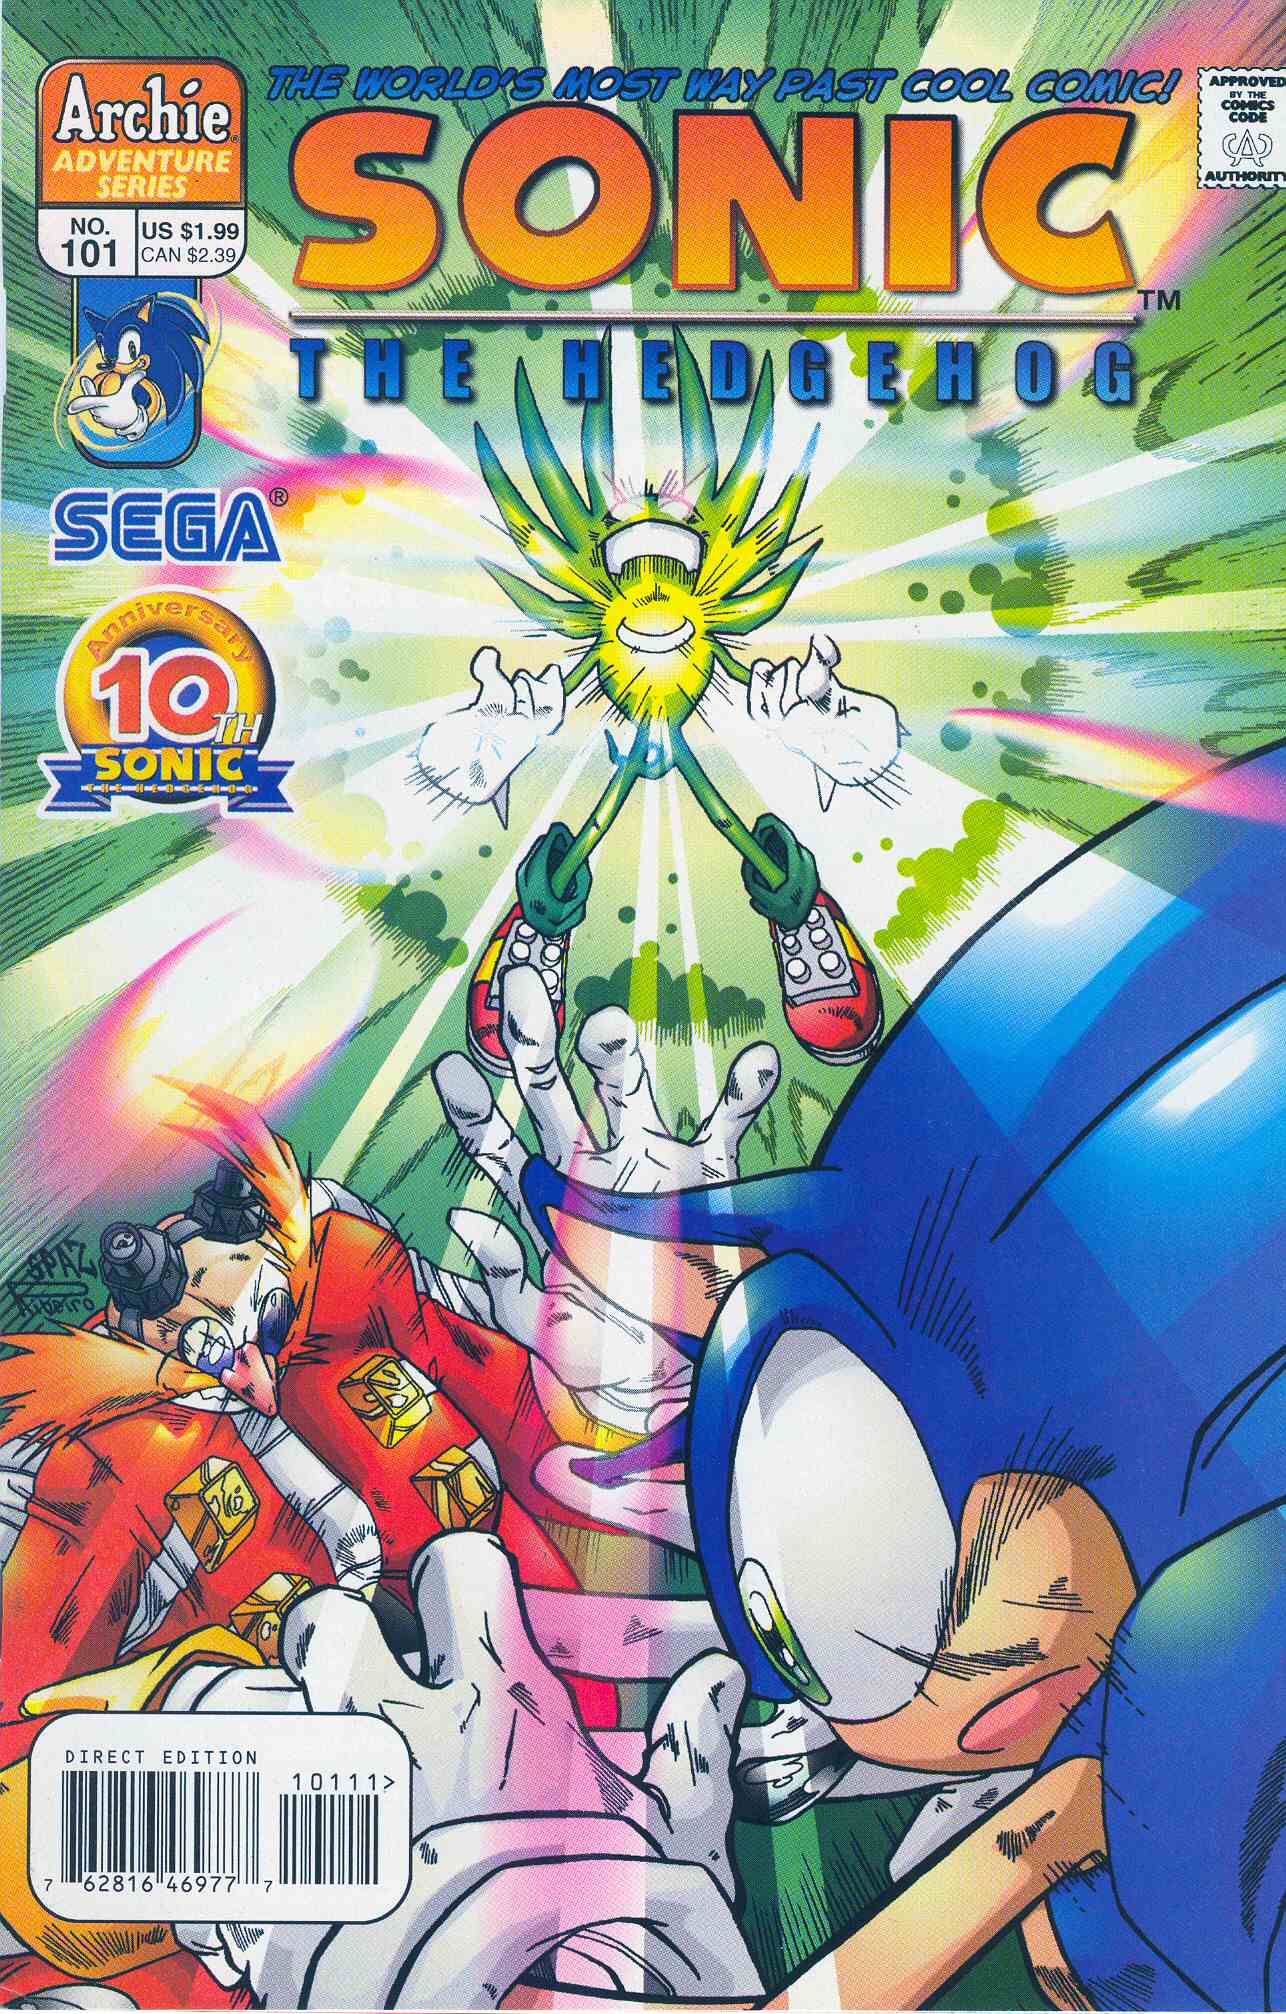 Sonic - Archie Adventure Series November 2001 Cover Page